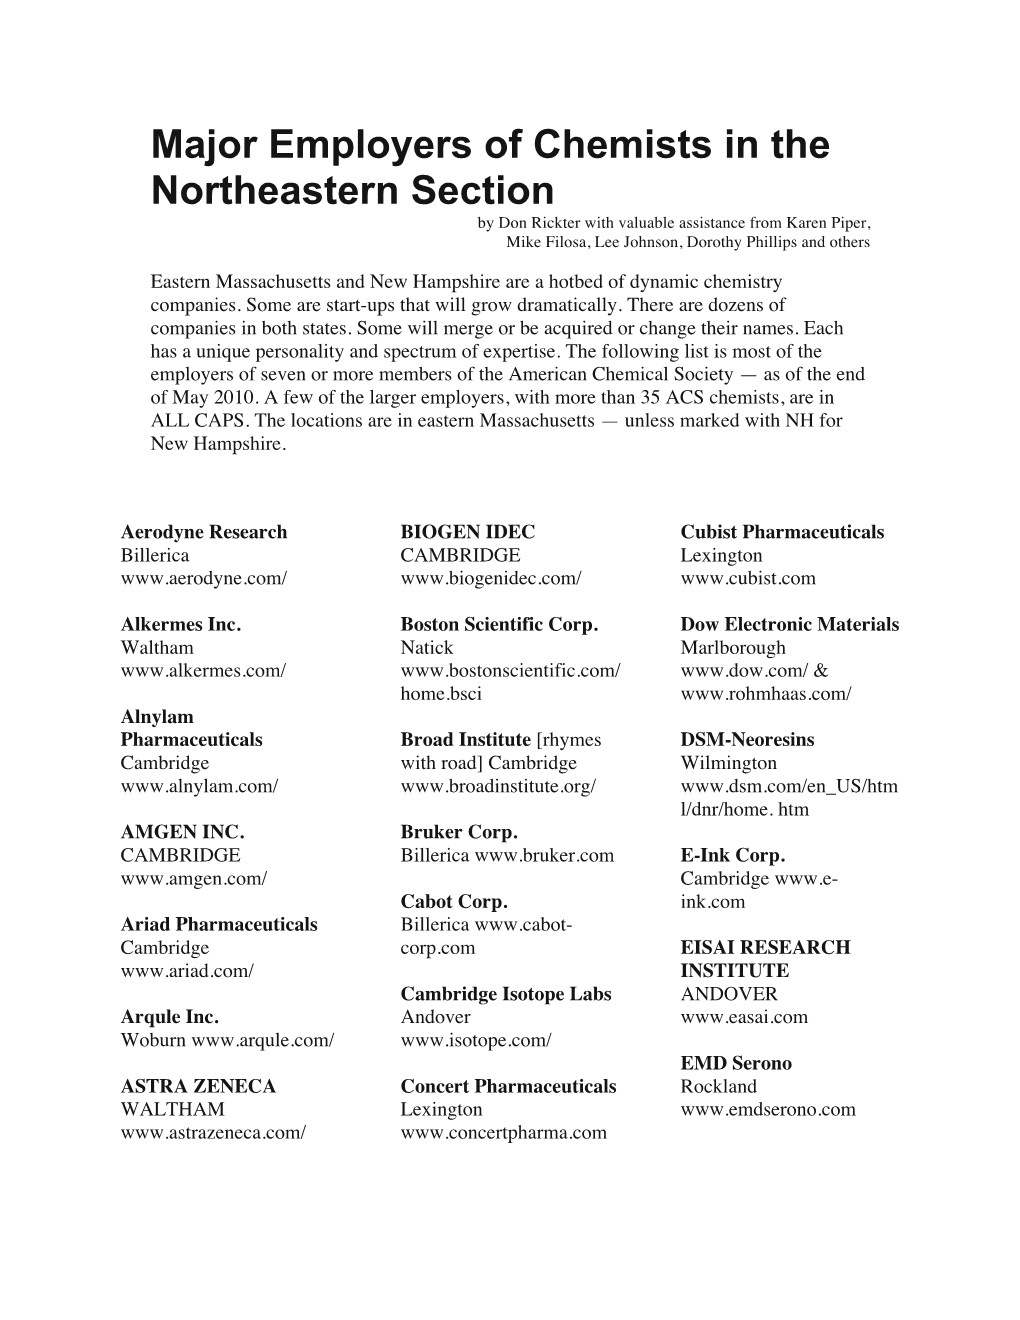 Major Employers of Chemists in the Northeastern Section